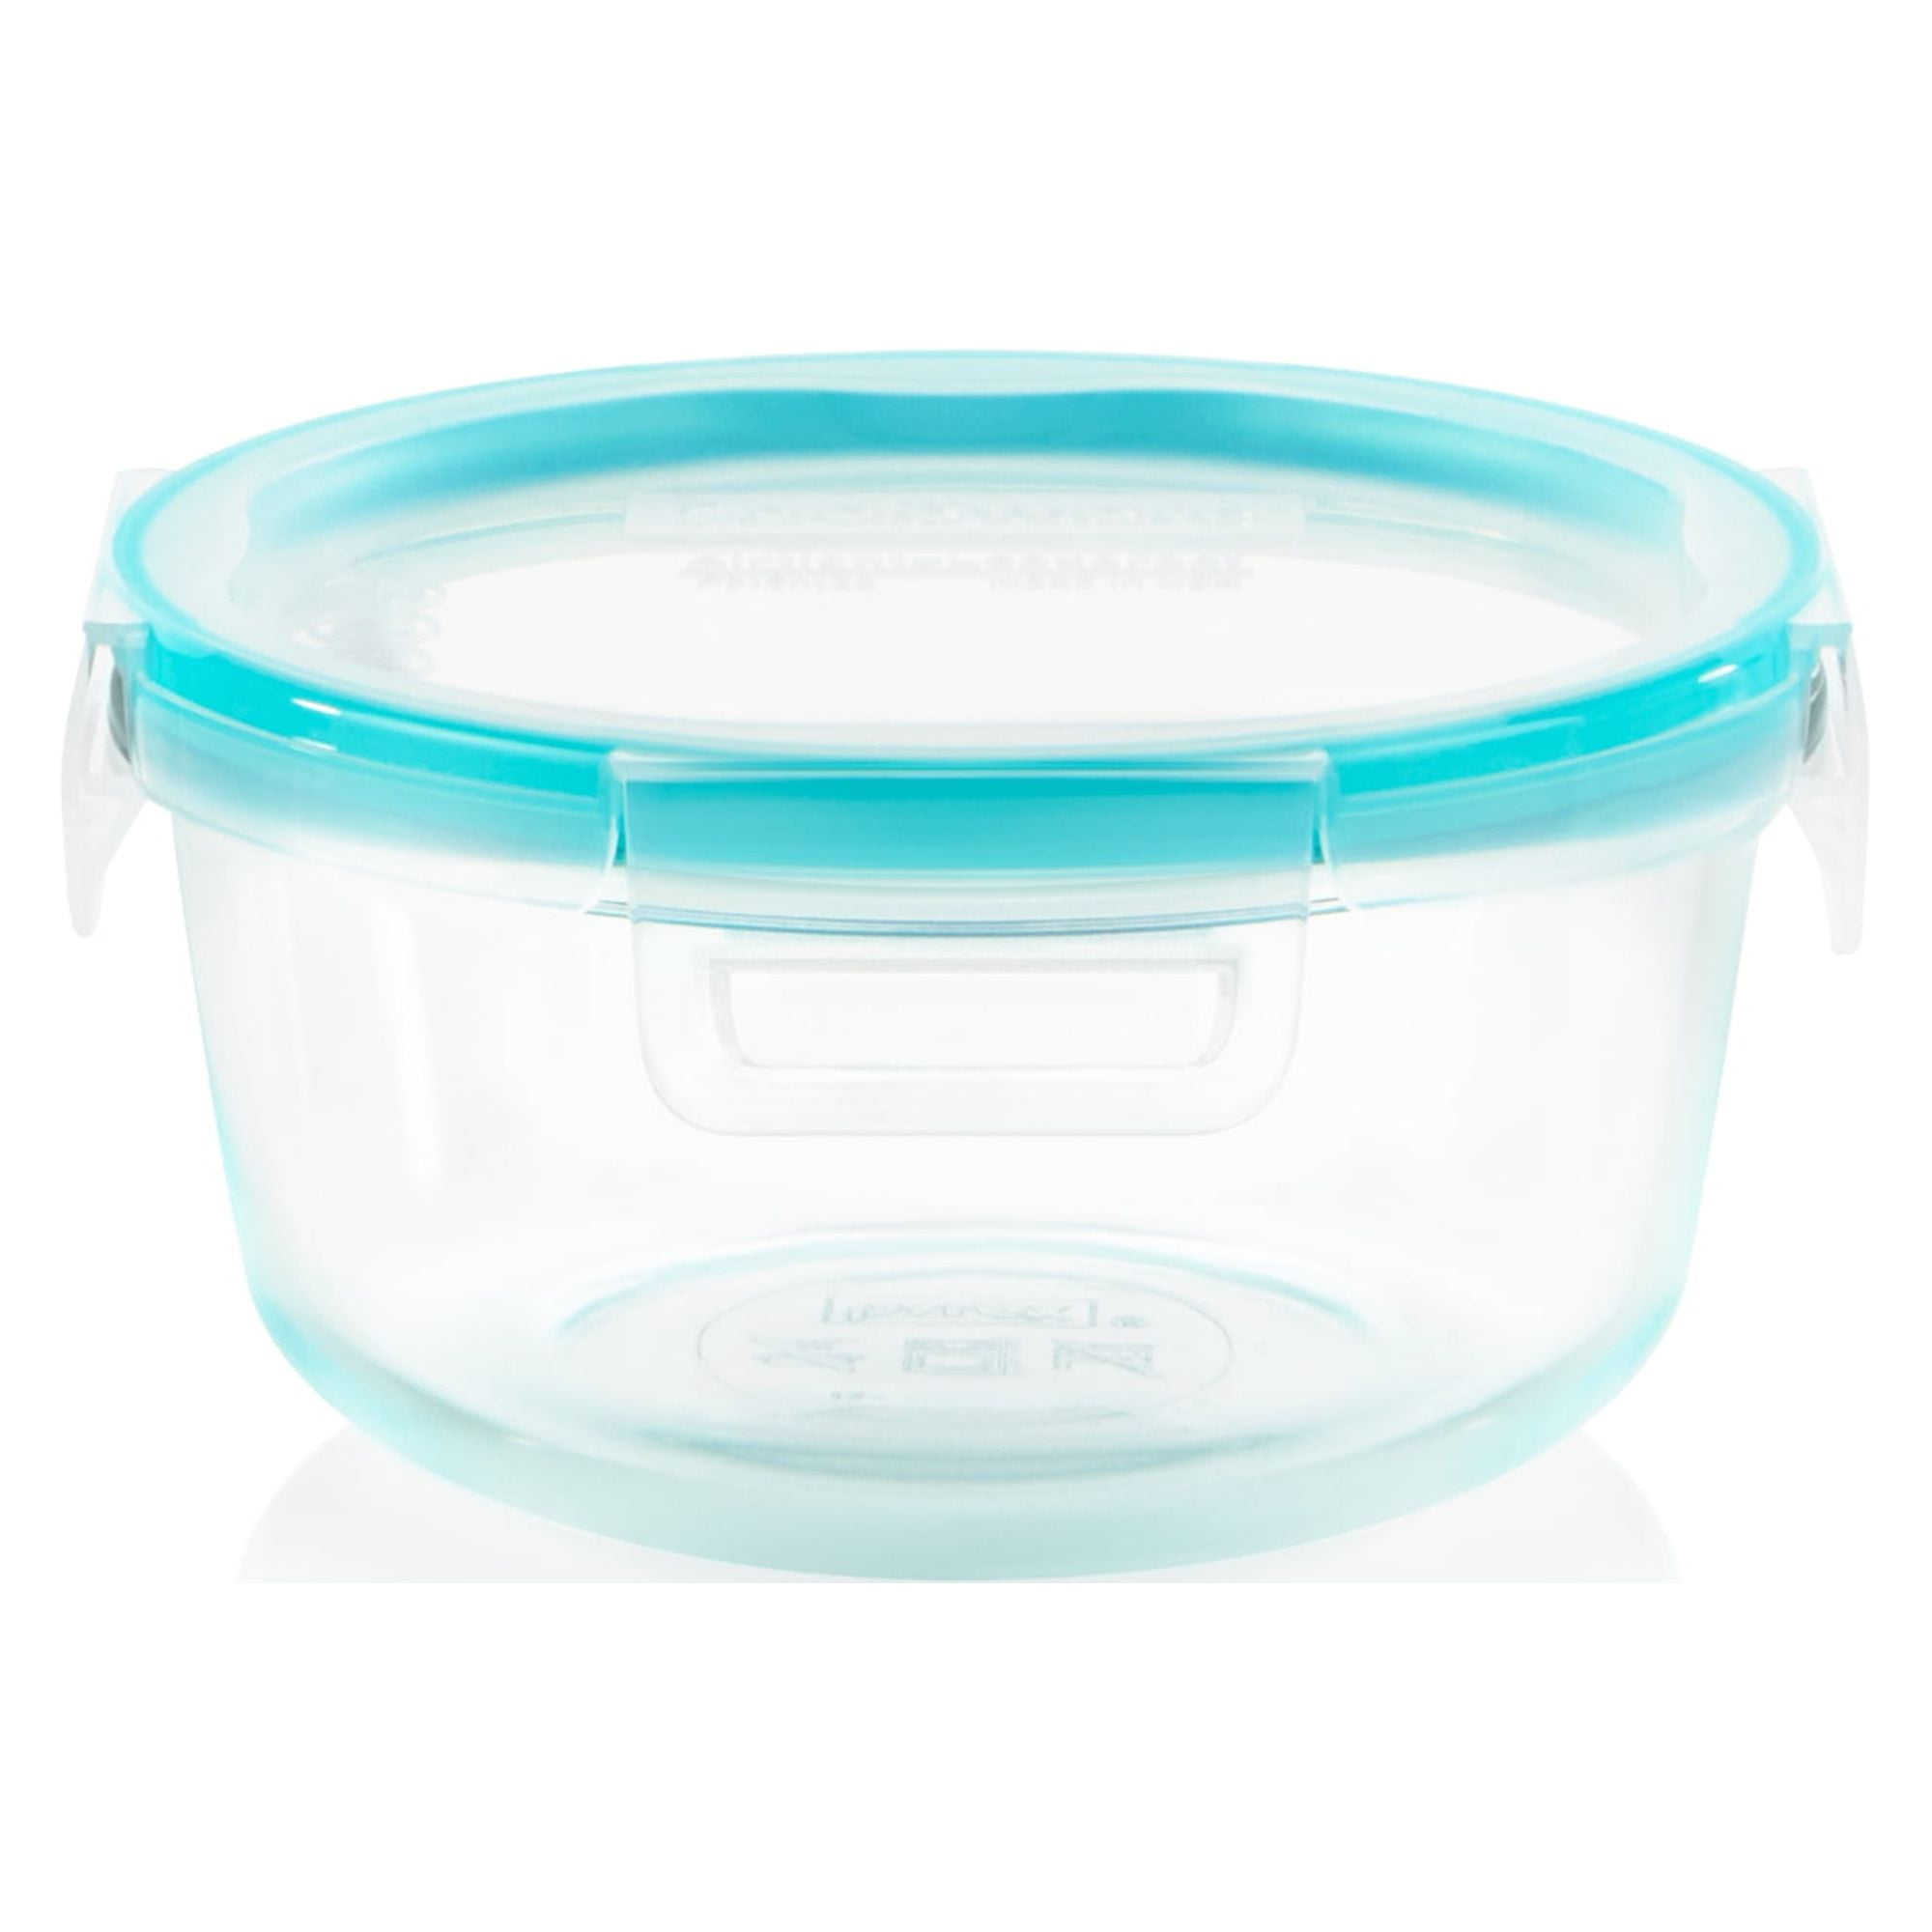 Snapware Glass Bpa-free Reusable Food Storage Container with Lid at